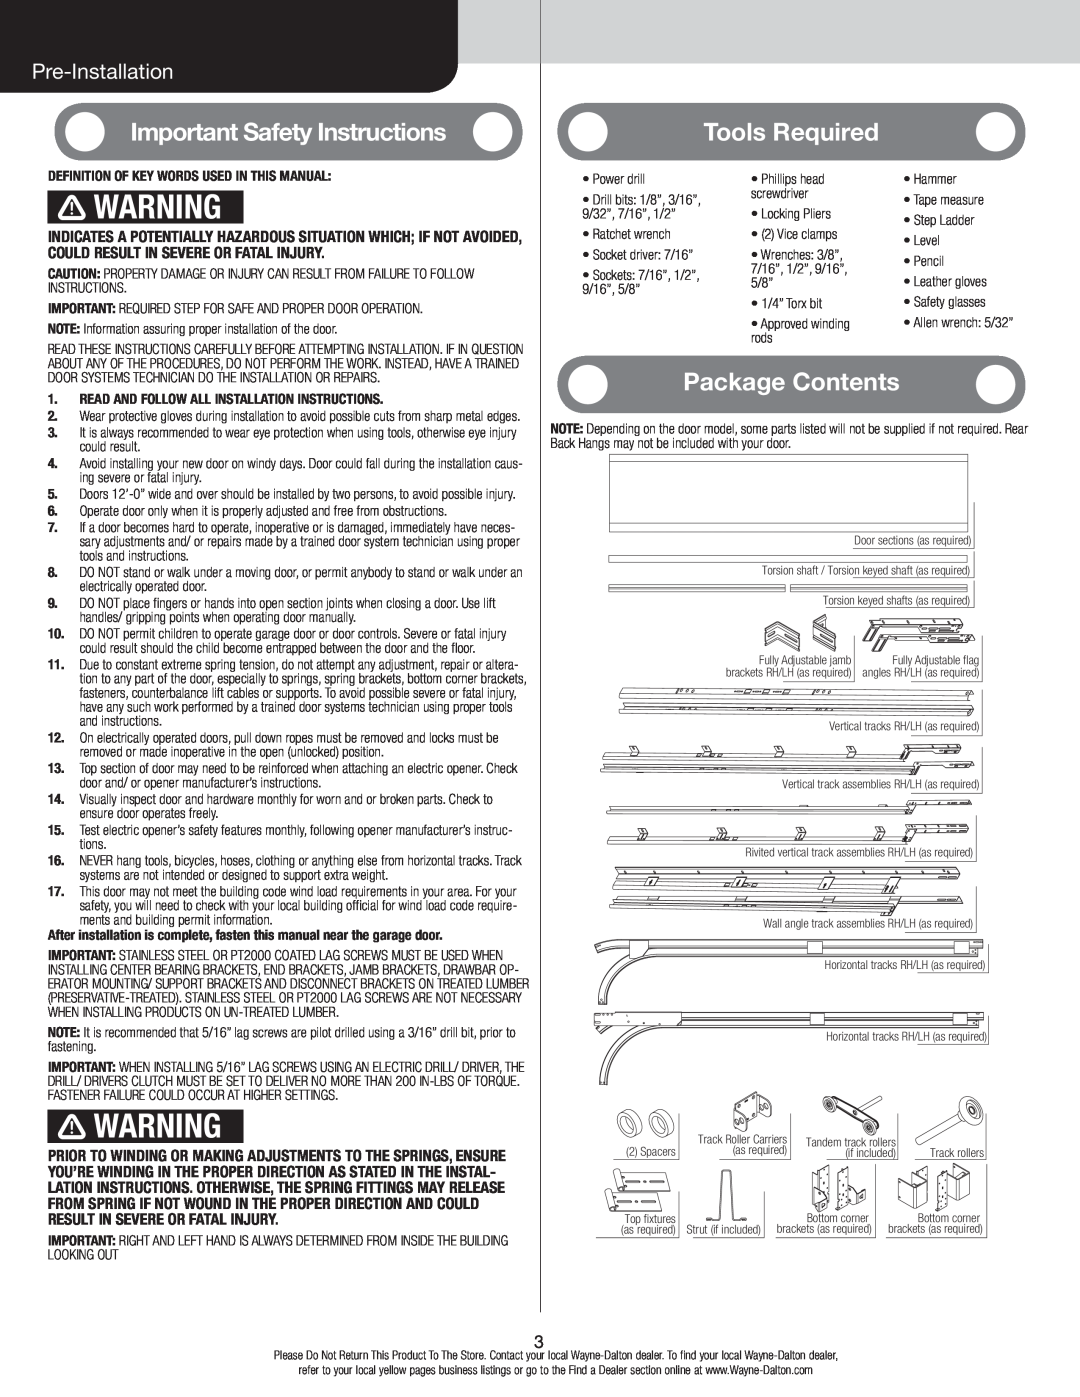 Wayne-Dalton 347610 Important Safety Instructions, Tools Required, Package Contents, Pre-Installation 